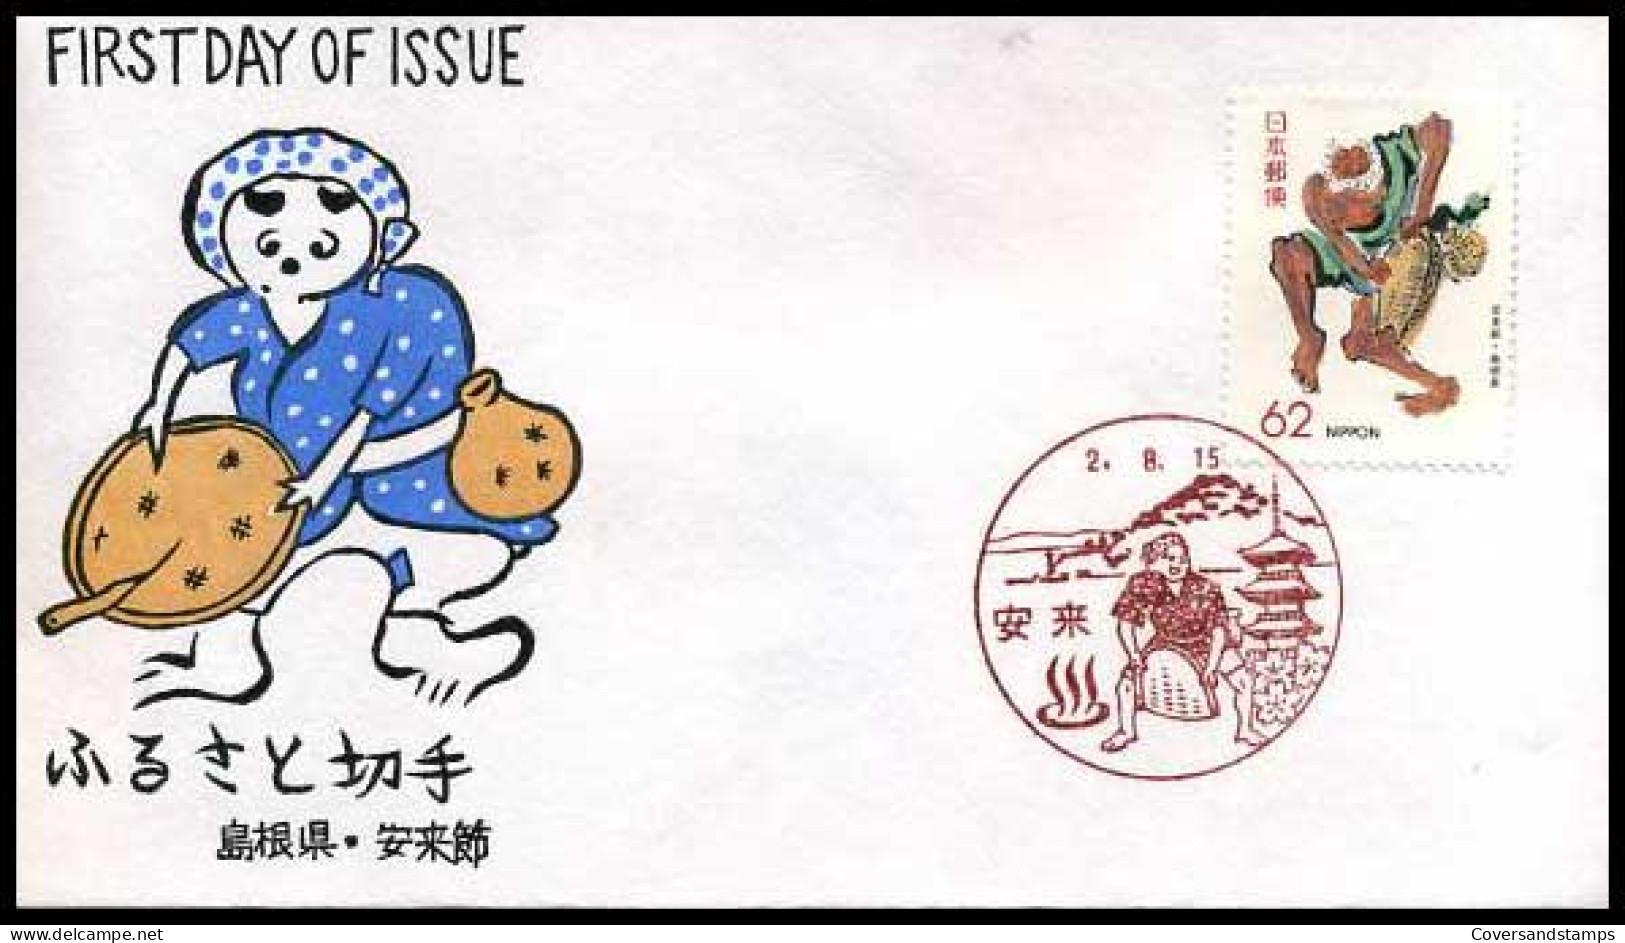 Japan - FDC - Homeland Stamps                                 - FDC